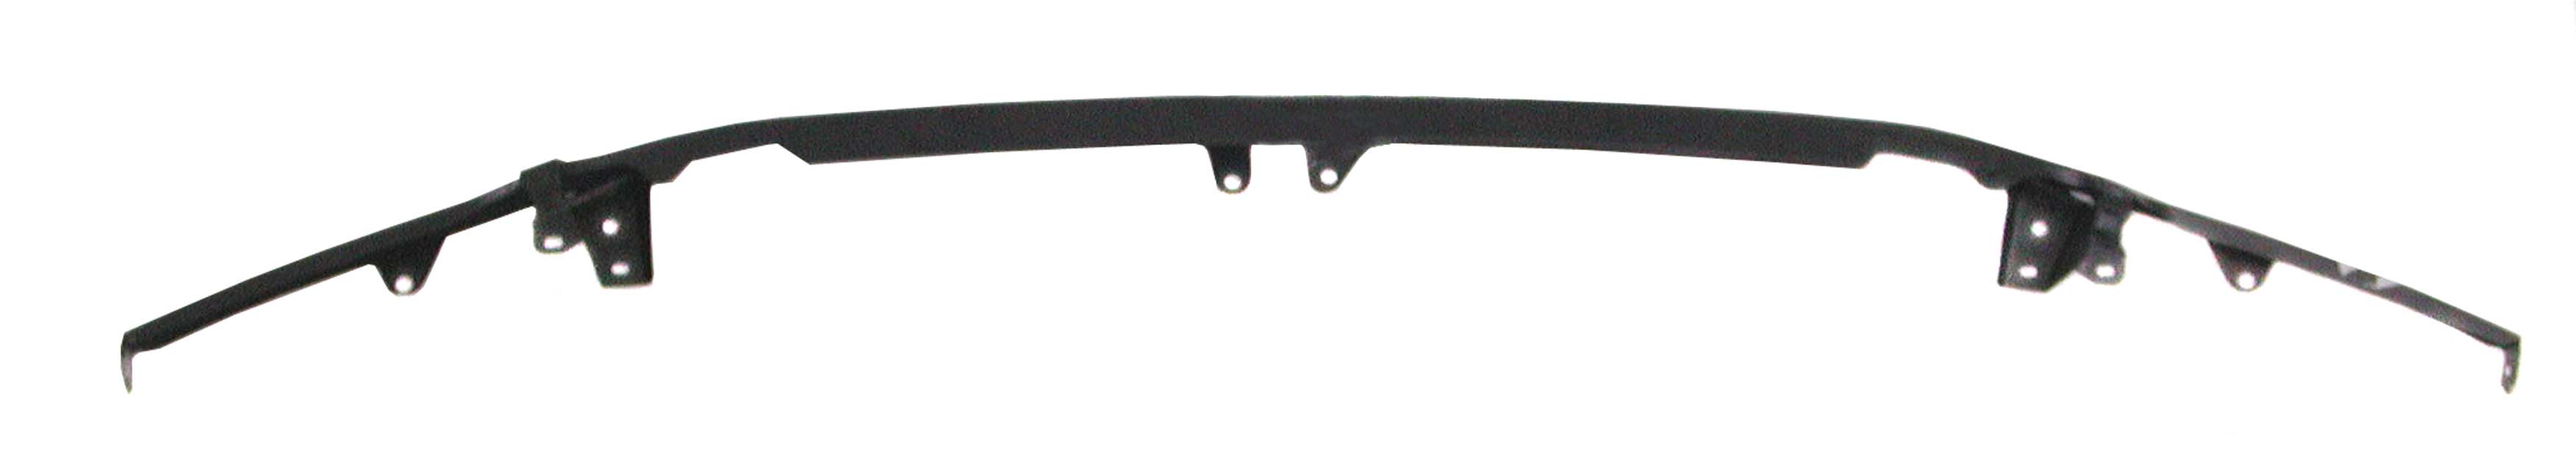 Aftermarket APRON/VALANCE/FILLER PLASTIC for TOYOTA - TUNDRA, TUNDRA,07-13,Front bumper retainer cover